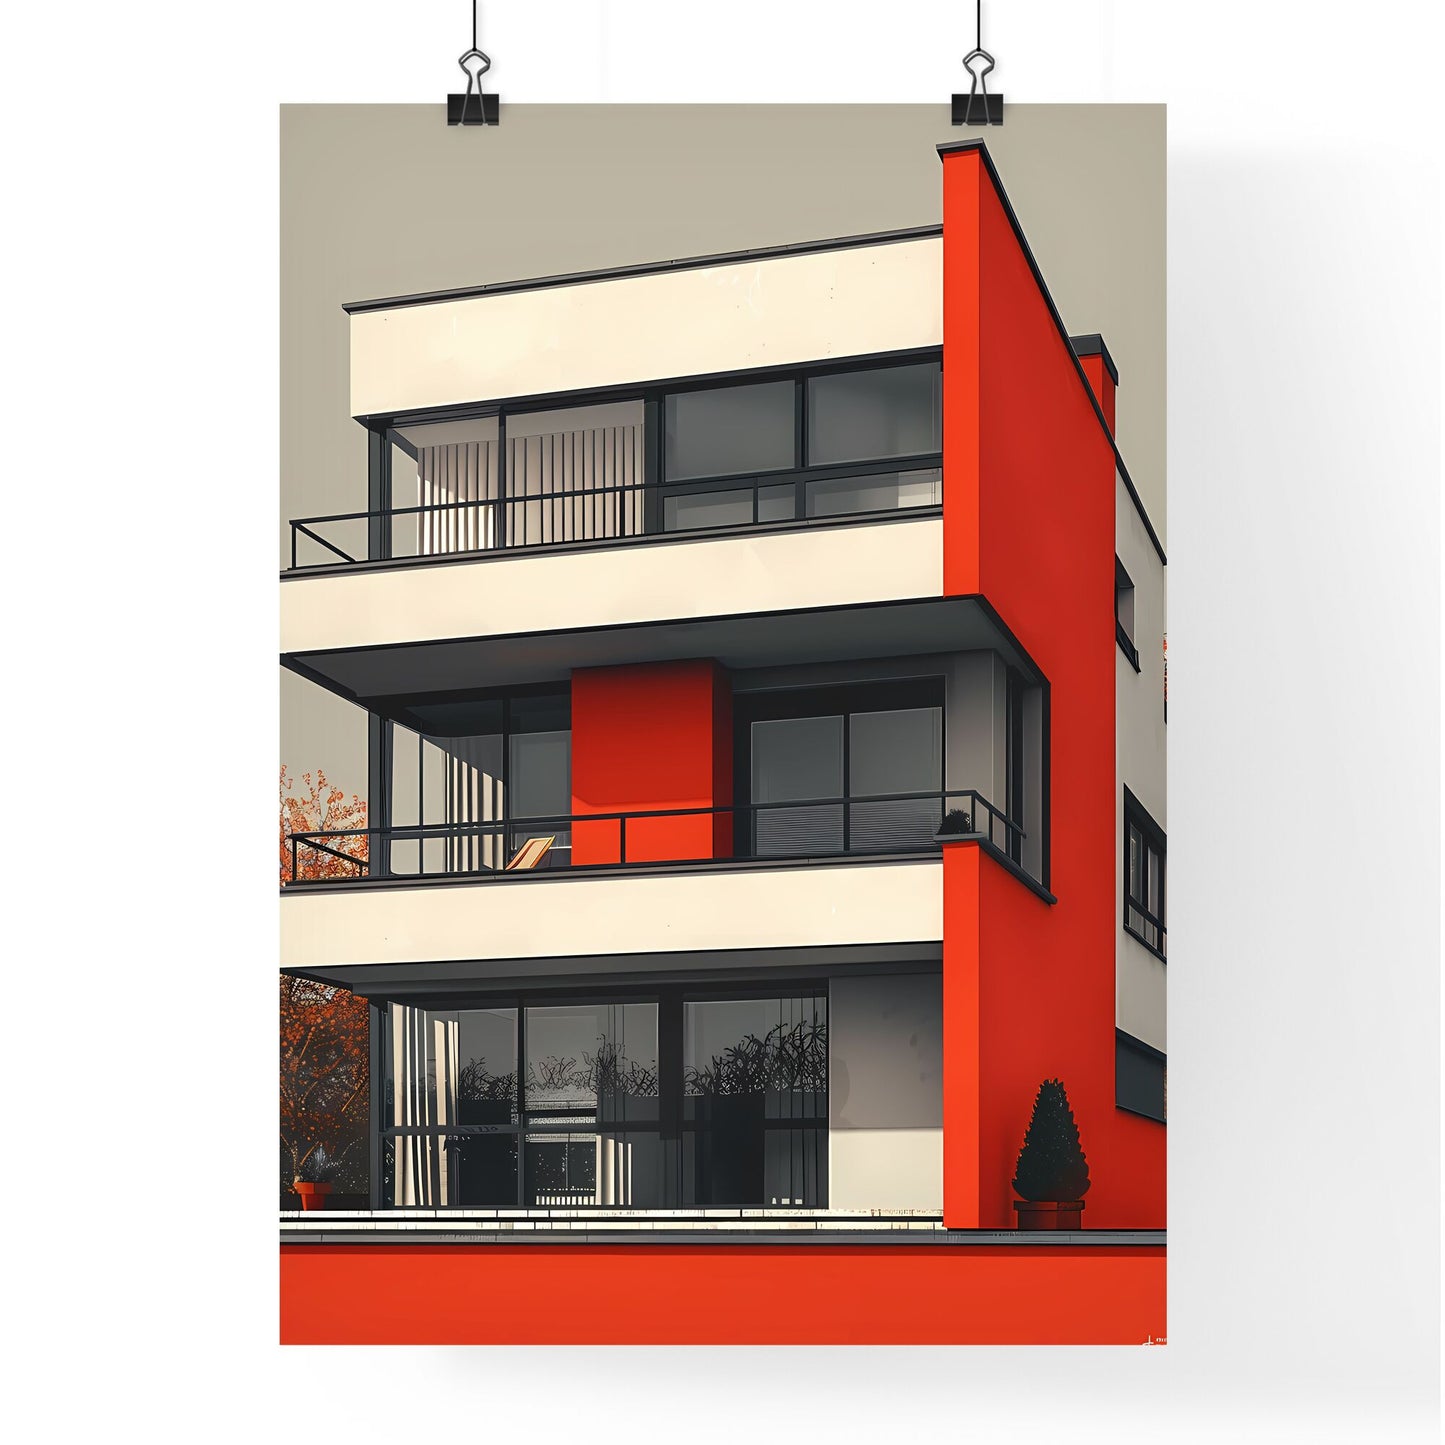 Vibrant Bauhaus-Style Building Painting: Flat Geometric Red and White Wall Art Default Title